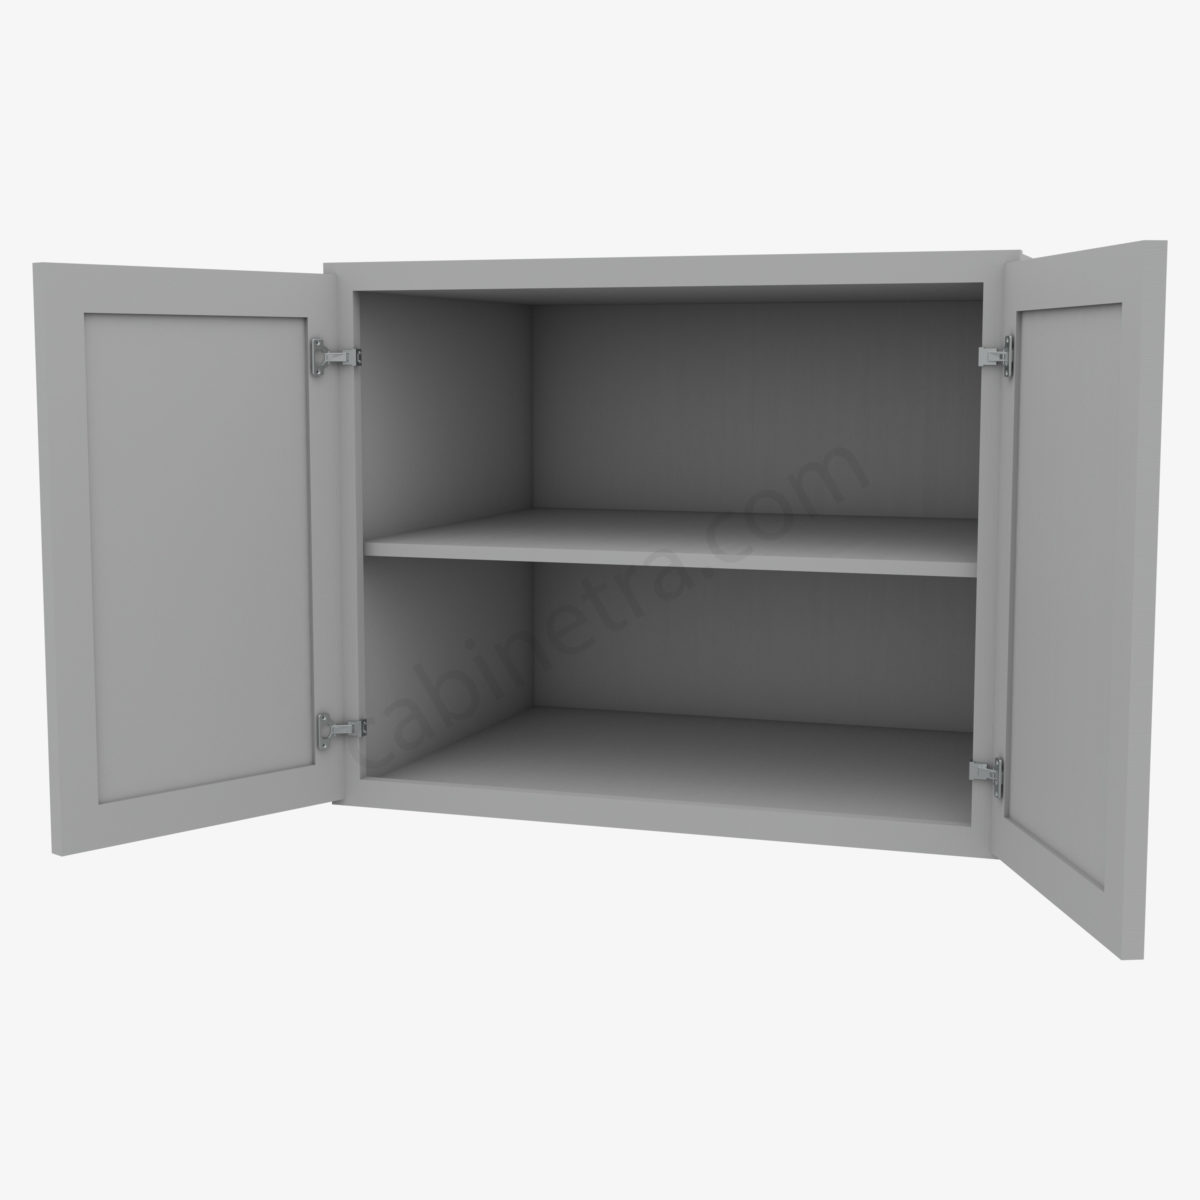 AB W302424B 5 Forevermark Lait Gray Shaker Cabinetra scaled